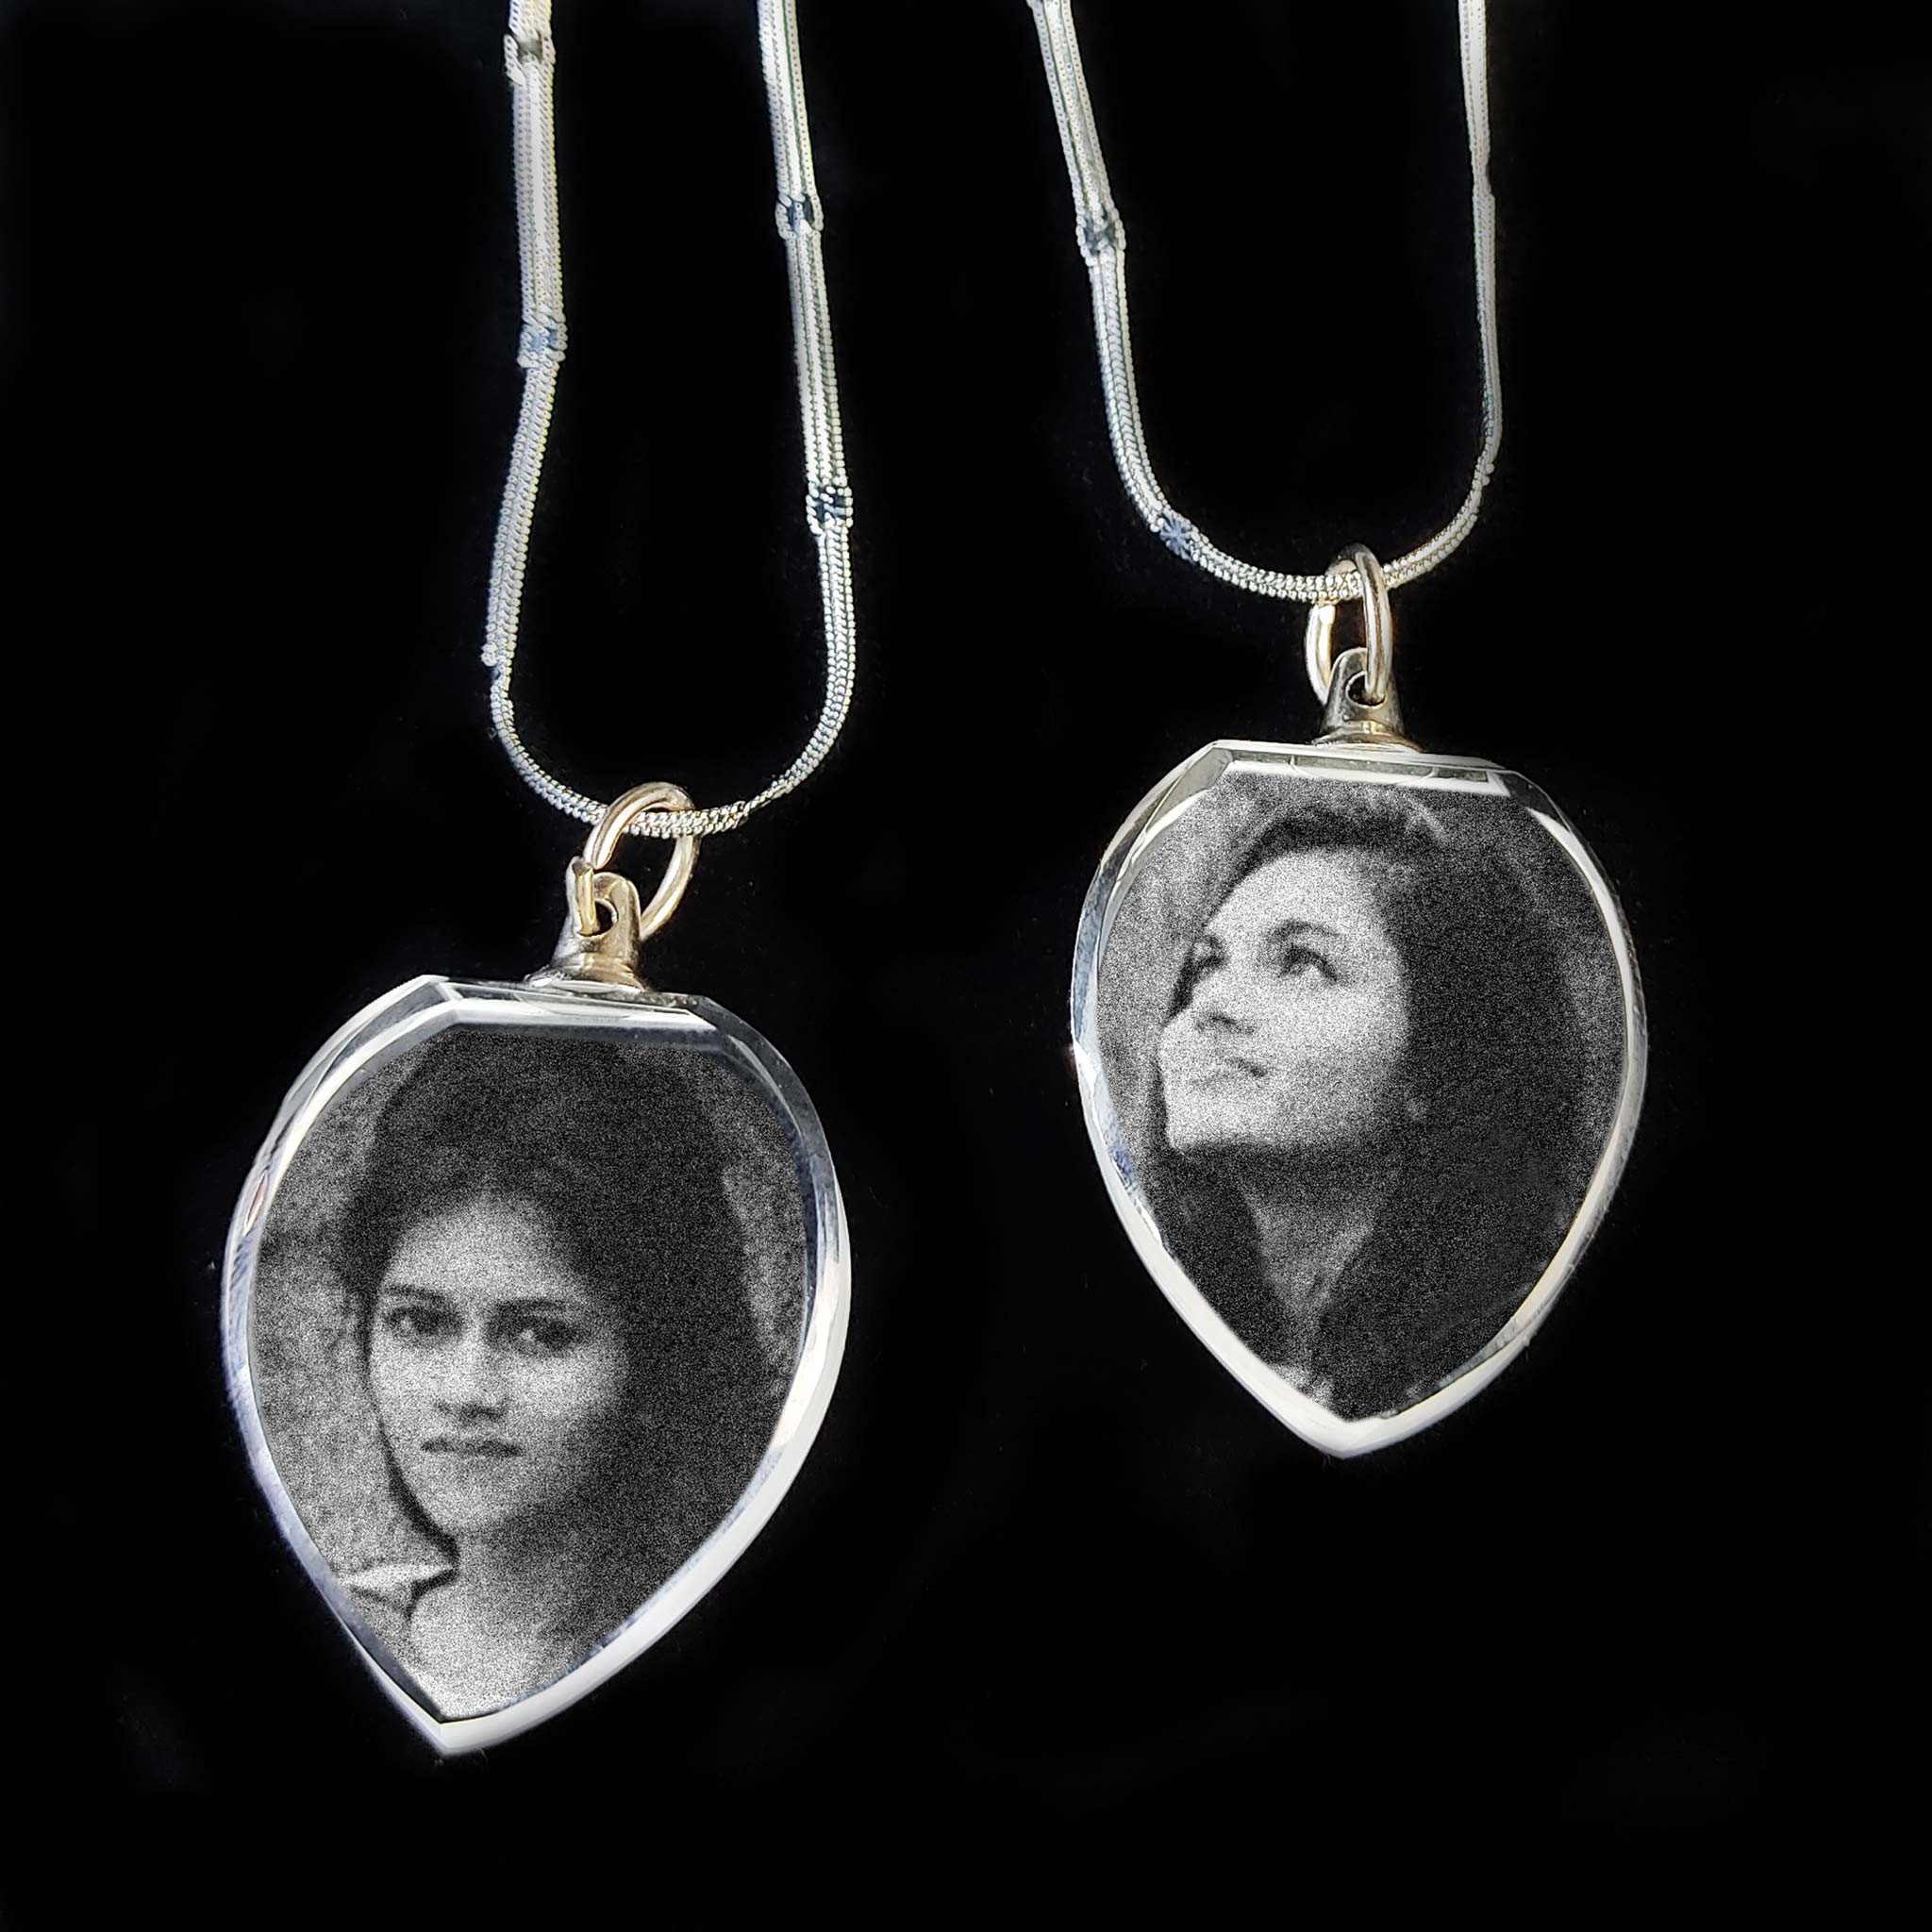 3d Laser engraved personalized Crystal Pendants heart locket - Crystal Moments